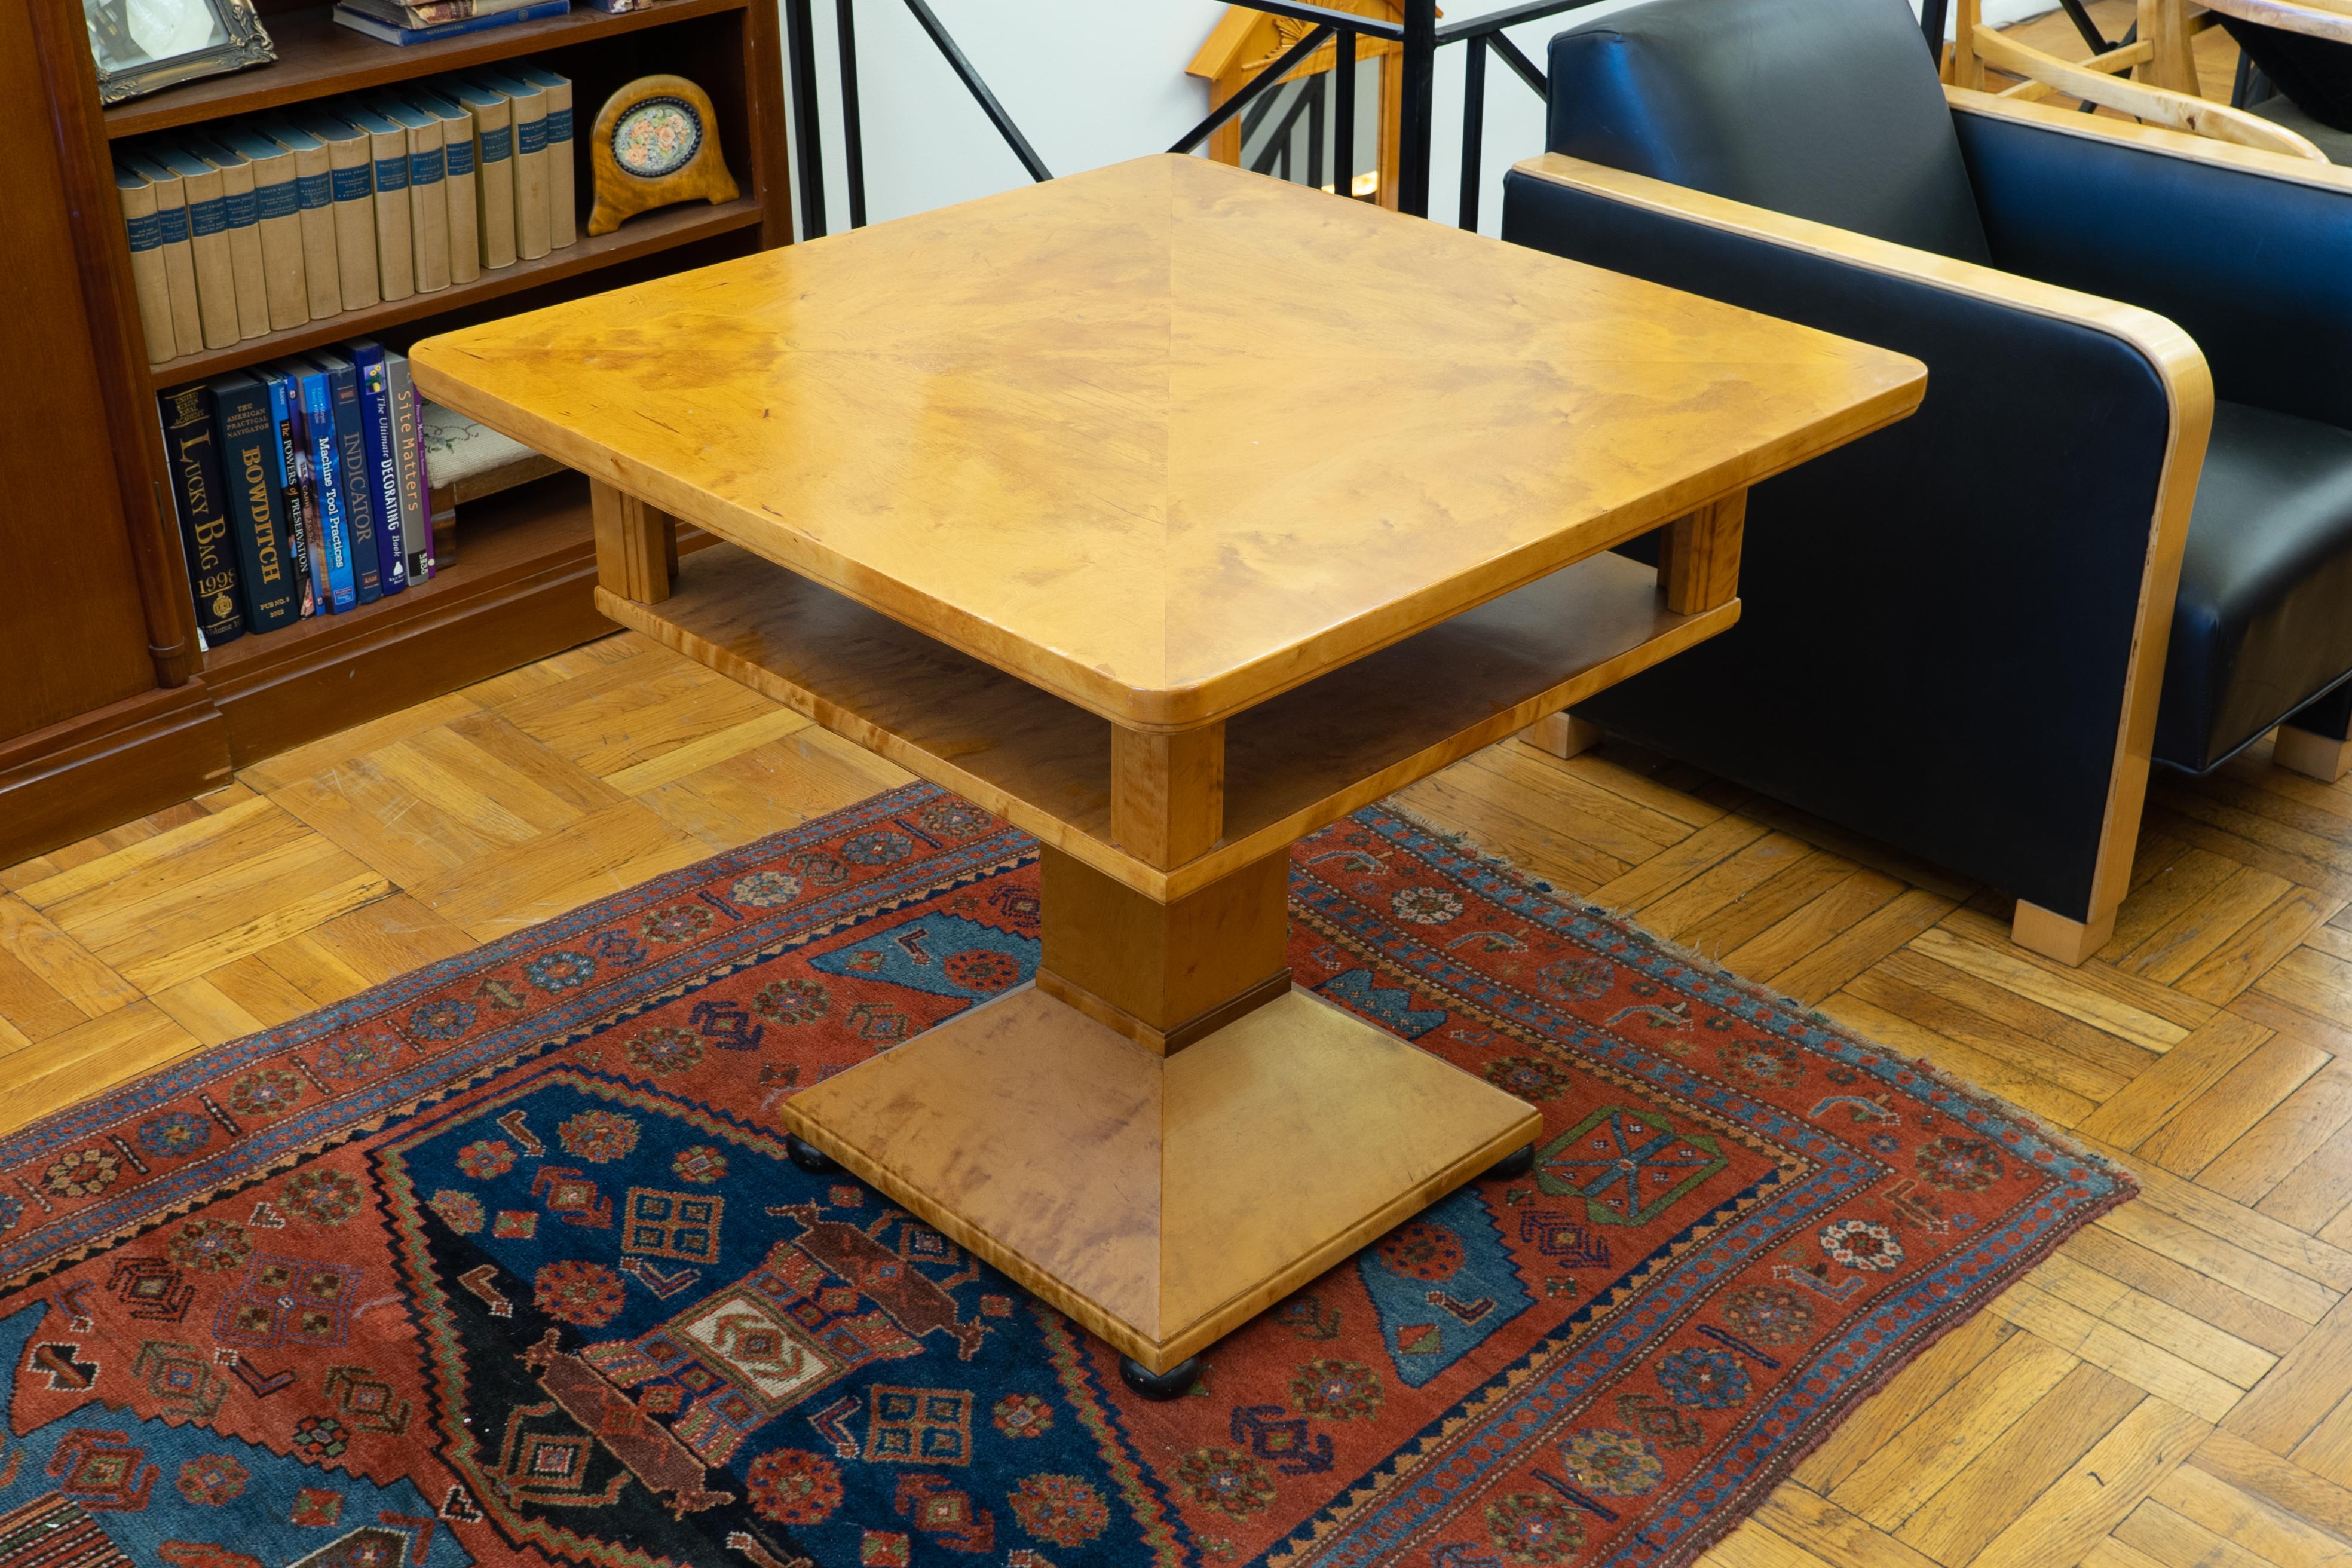 Nordic birch veneer adorns this center table. An open compartment supported by architectural columns is fully finished as well and is meant to allow light to pass through the space. A pyramidal base with a footprint of 19” x 19” completes the design